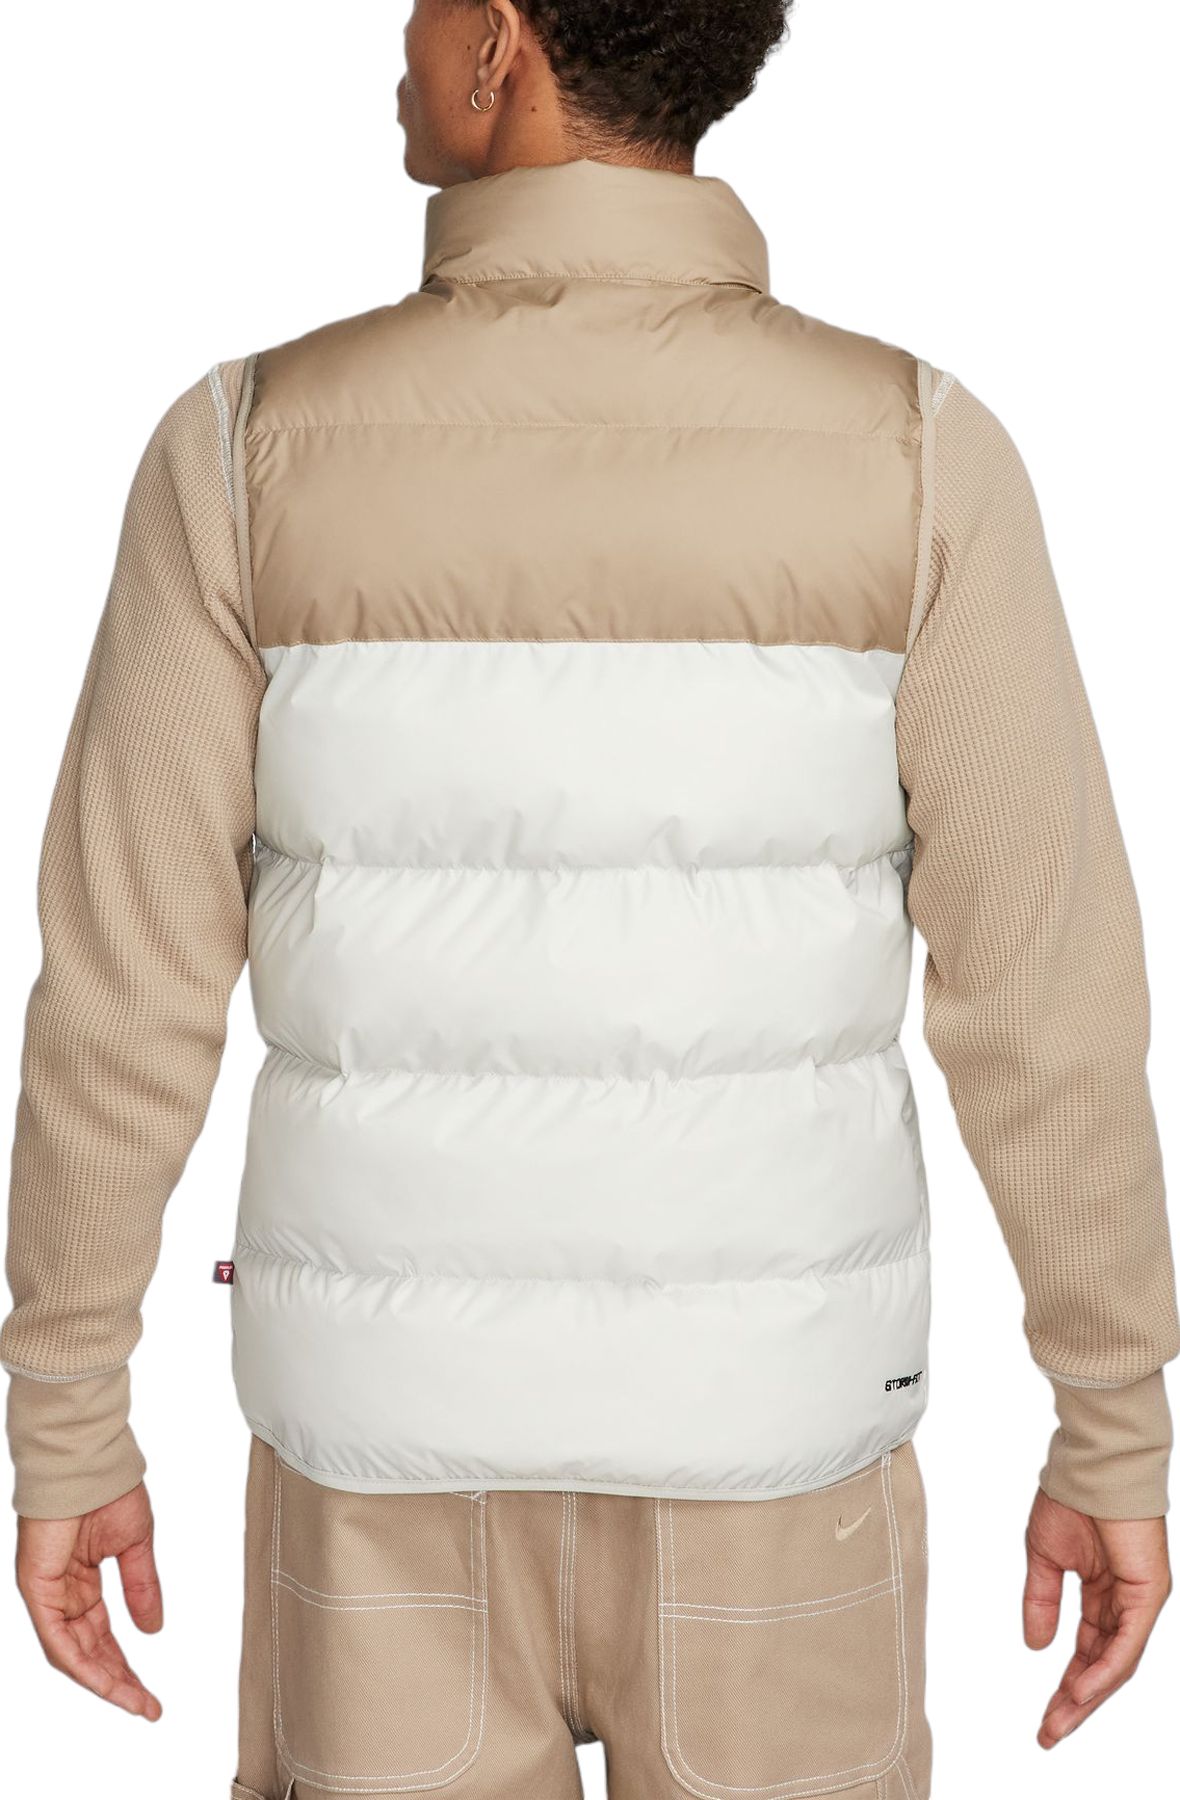 Men's Vests - Insulated Vests for Skiing & Sailing